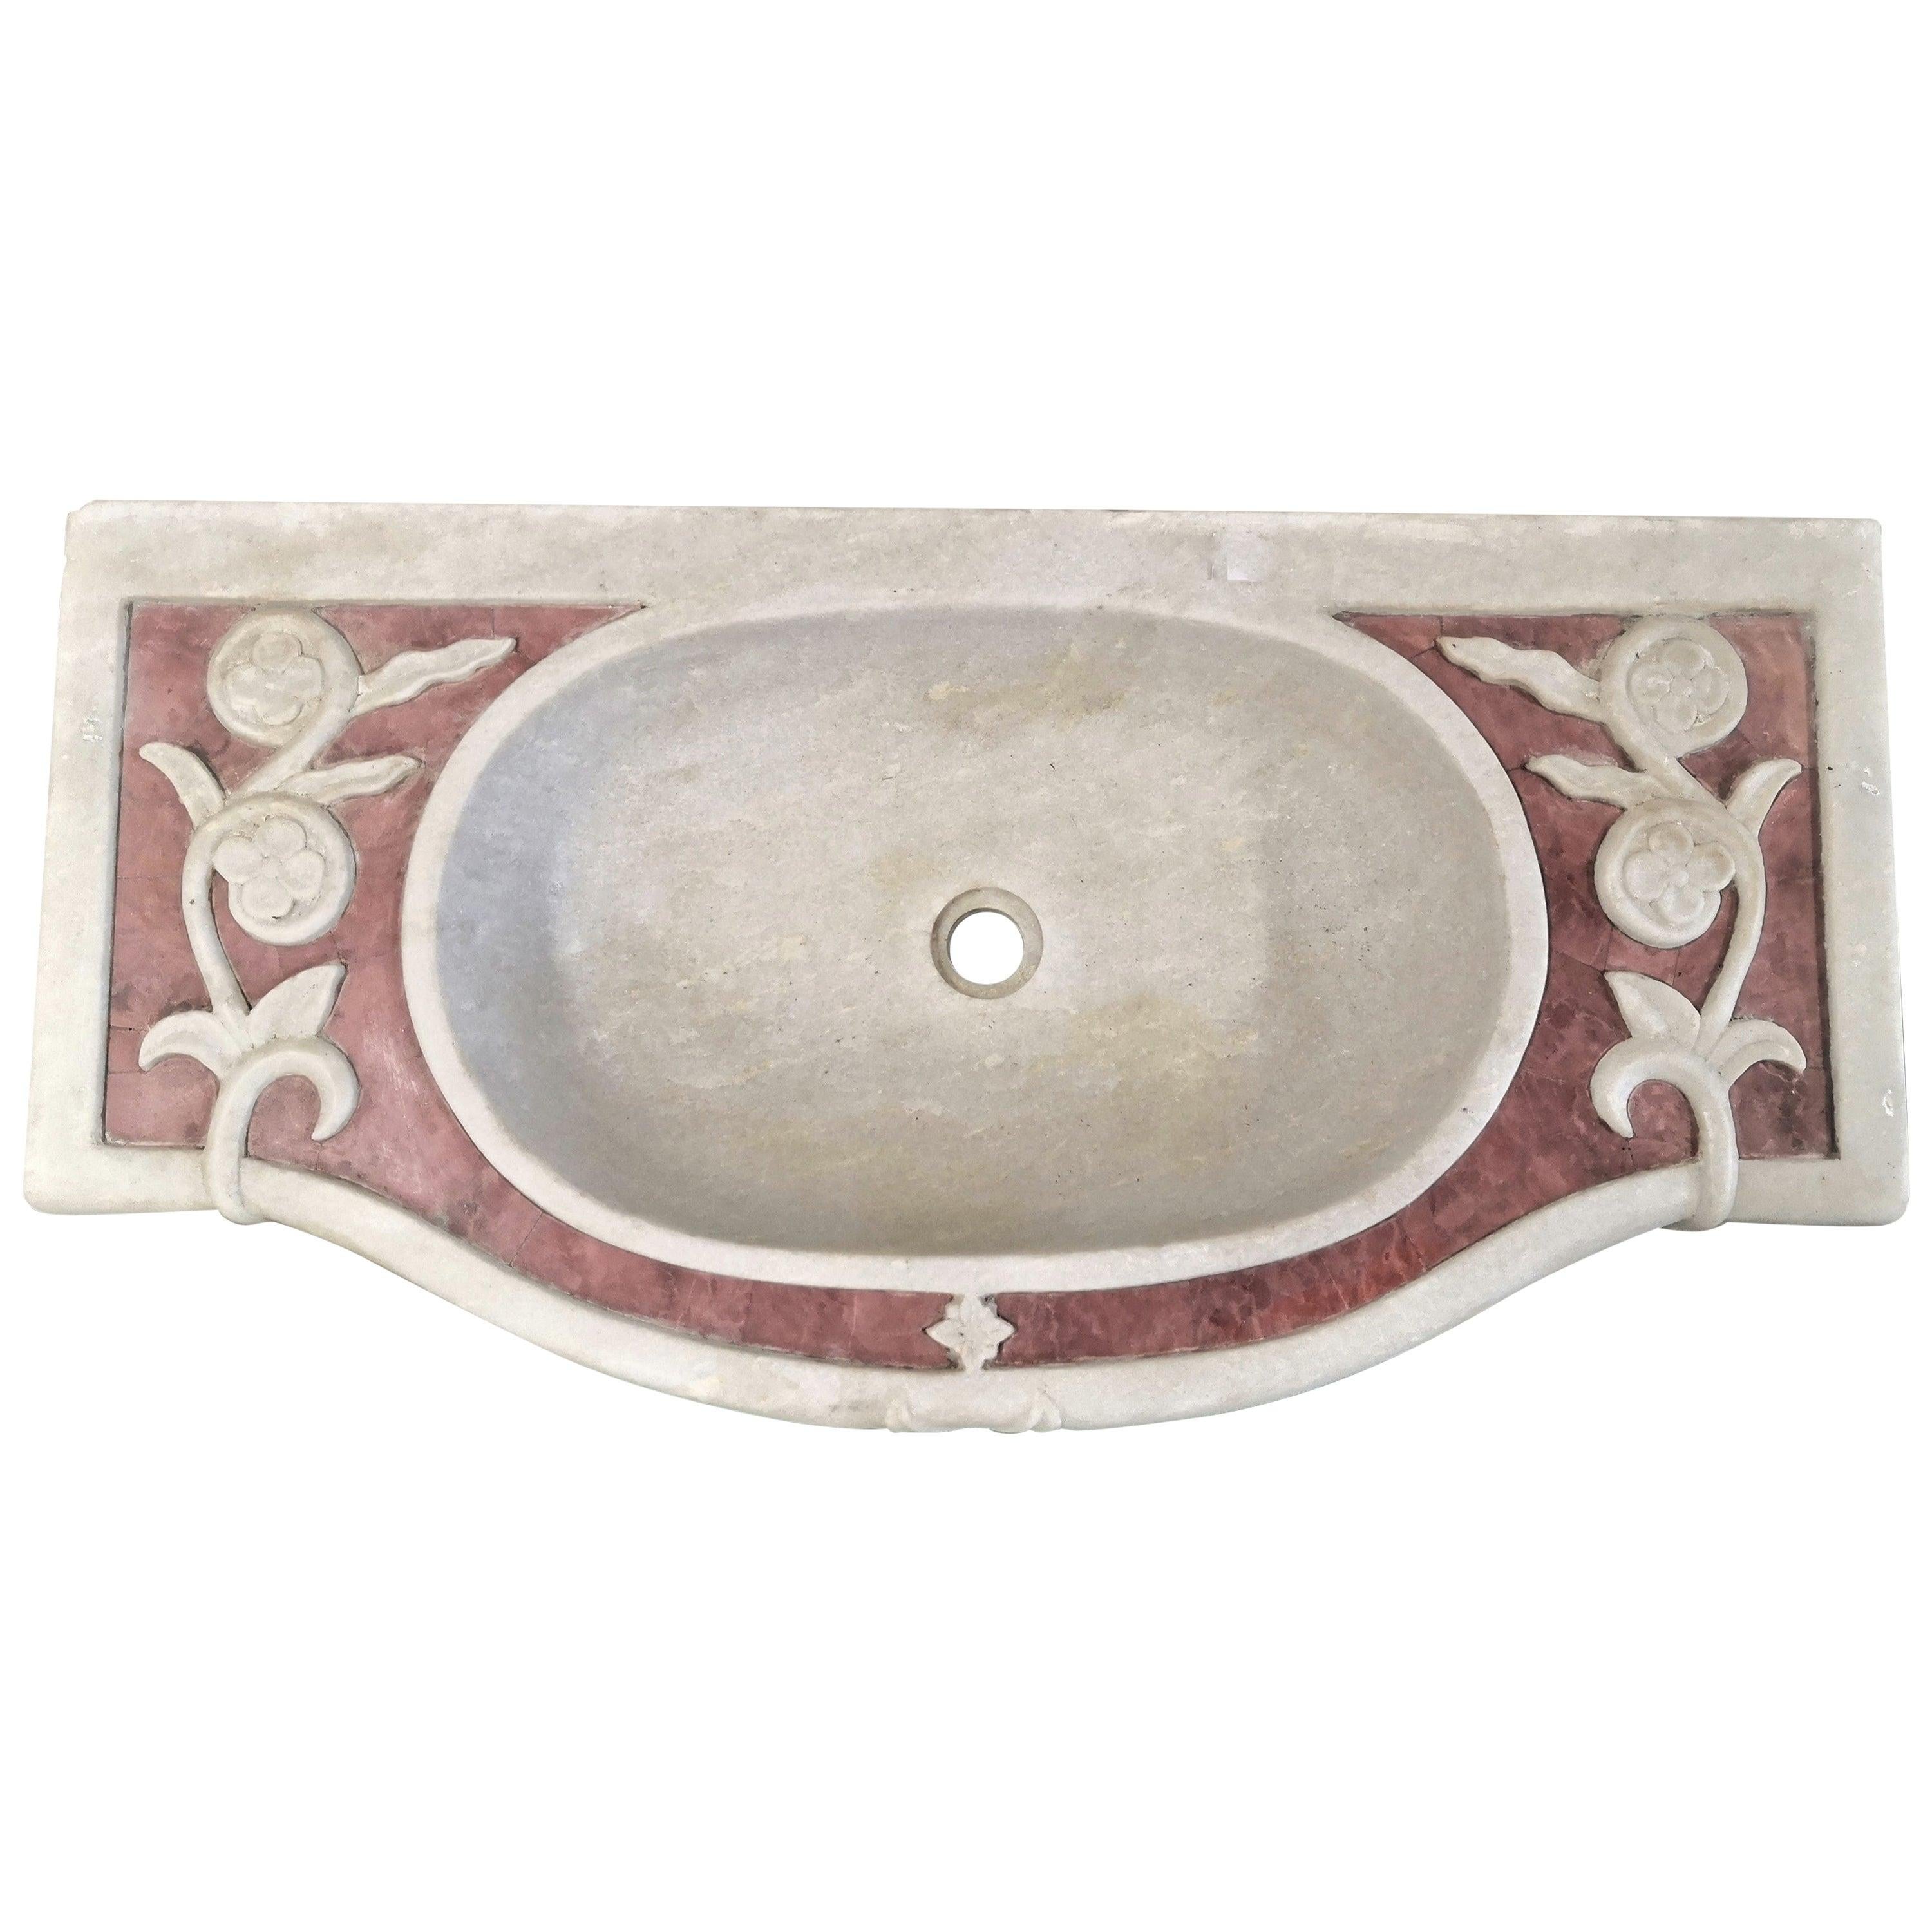 Classical Inlaid Carved Marble Stone Sink Basin